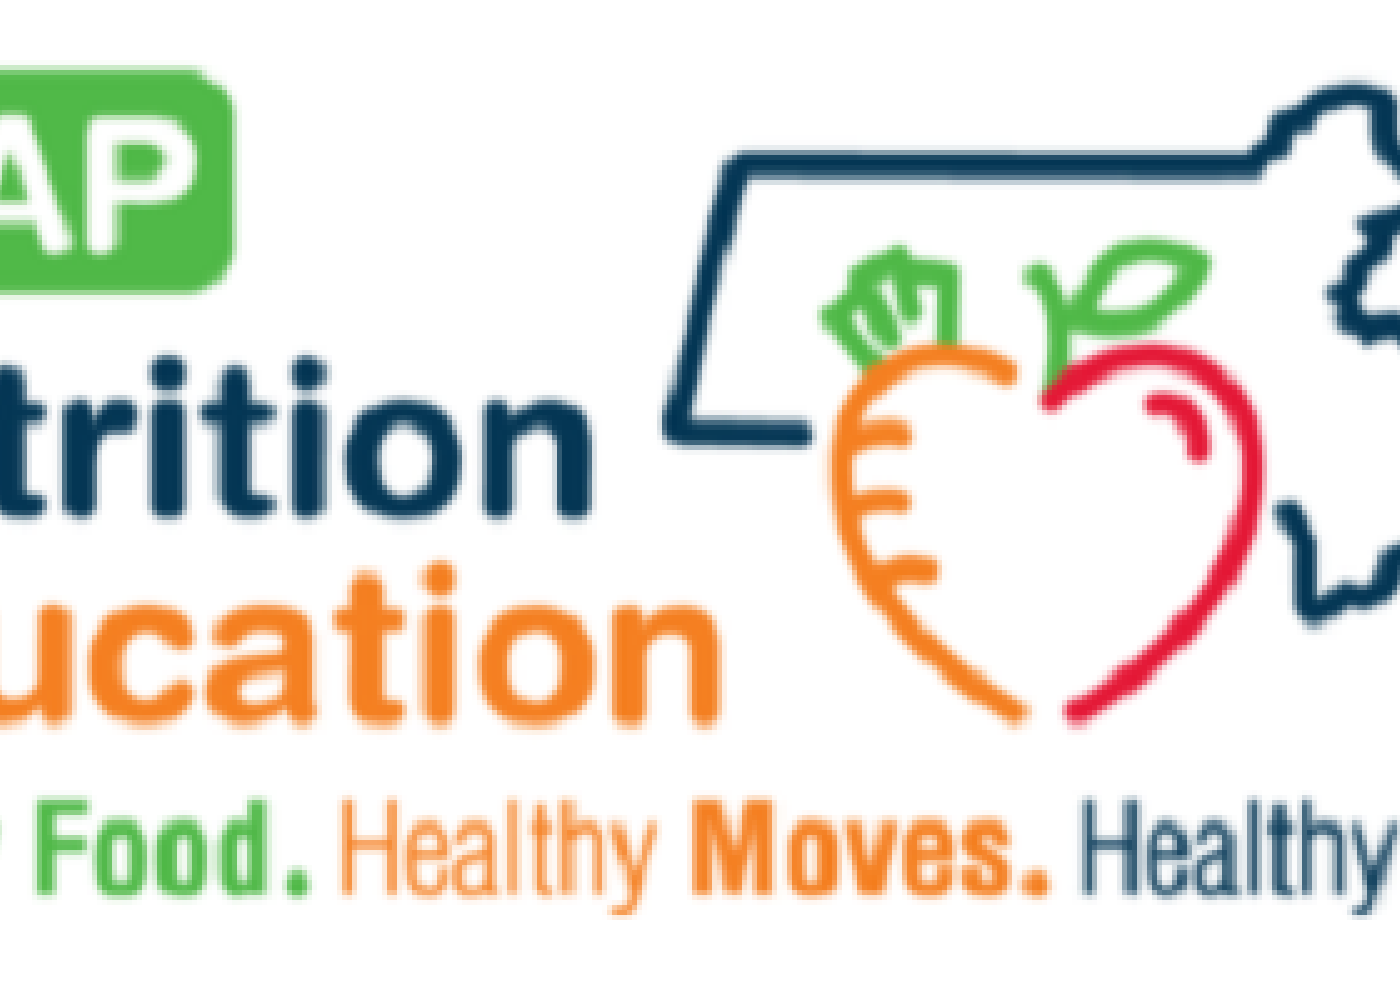 SNAP Nutrition Education Health Food. Healthy Moves. Healthy You. with an outline of Massachusetts and an apple